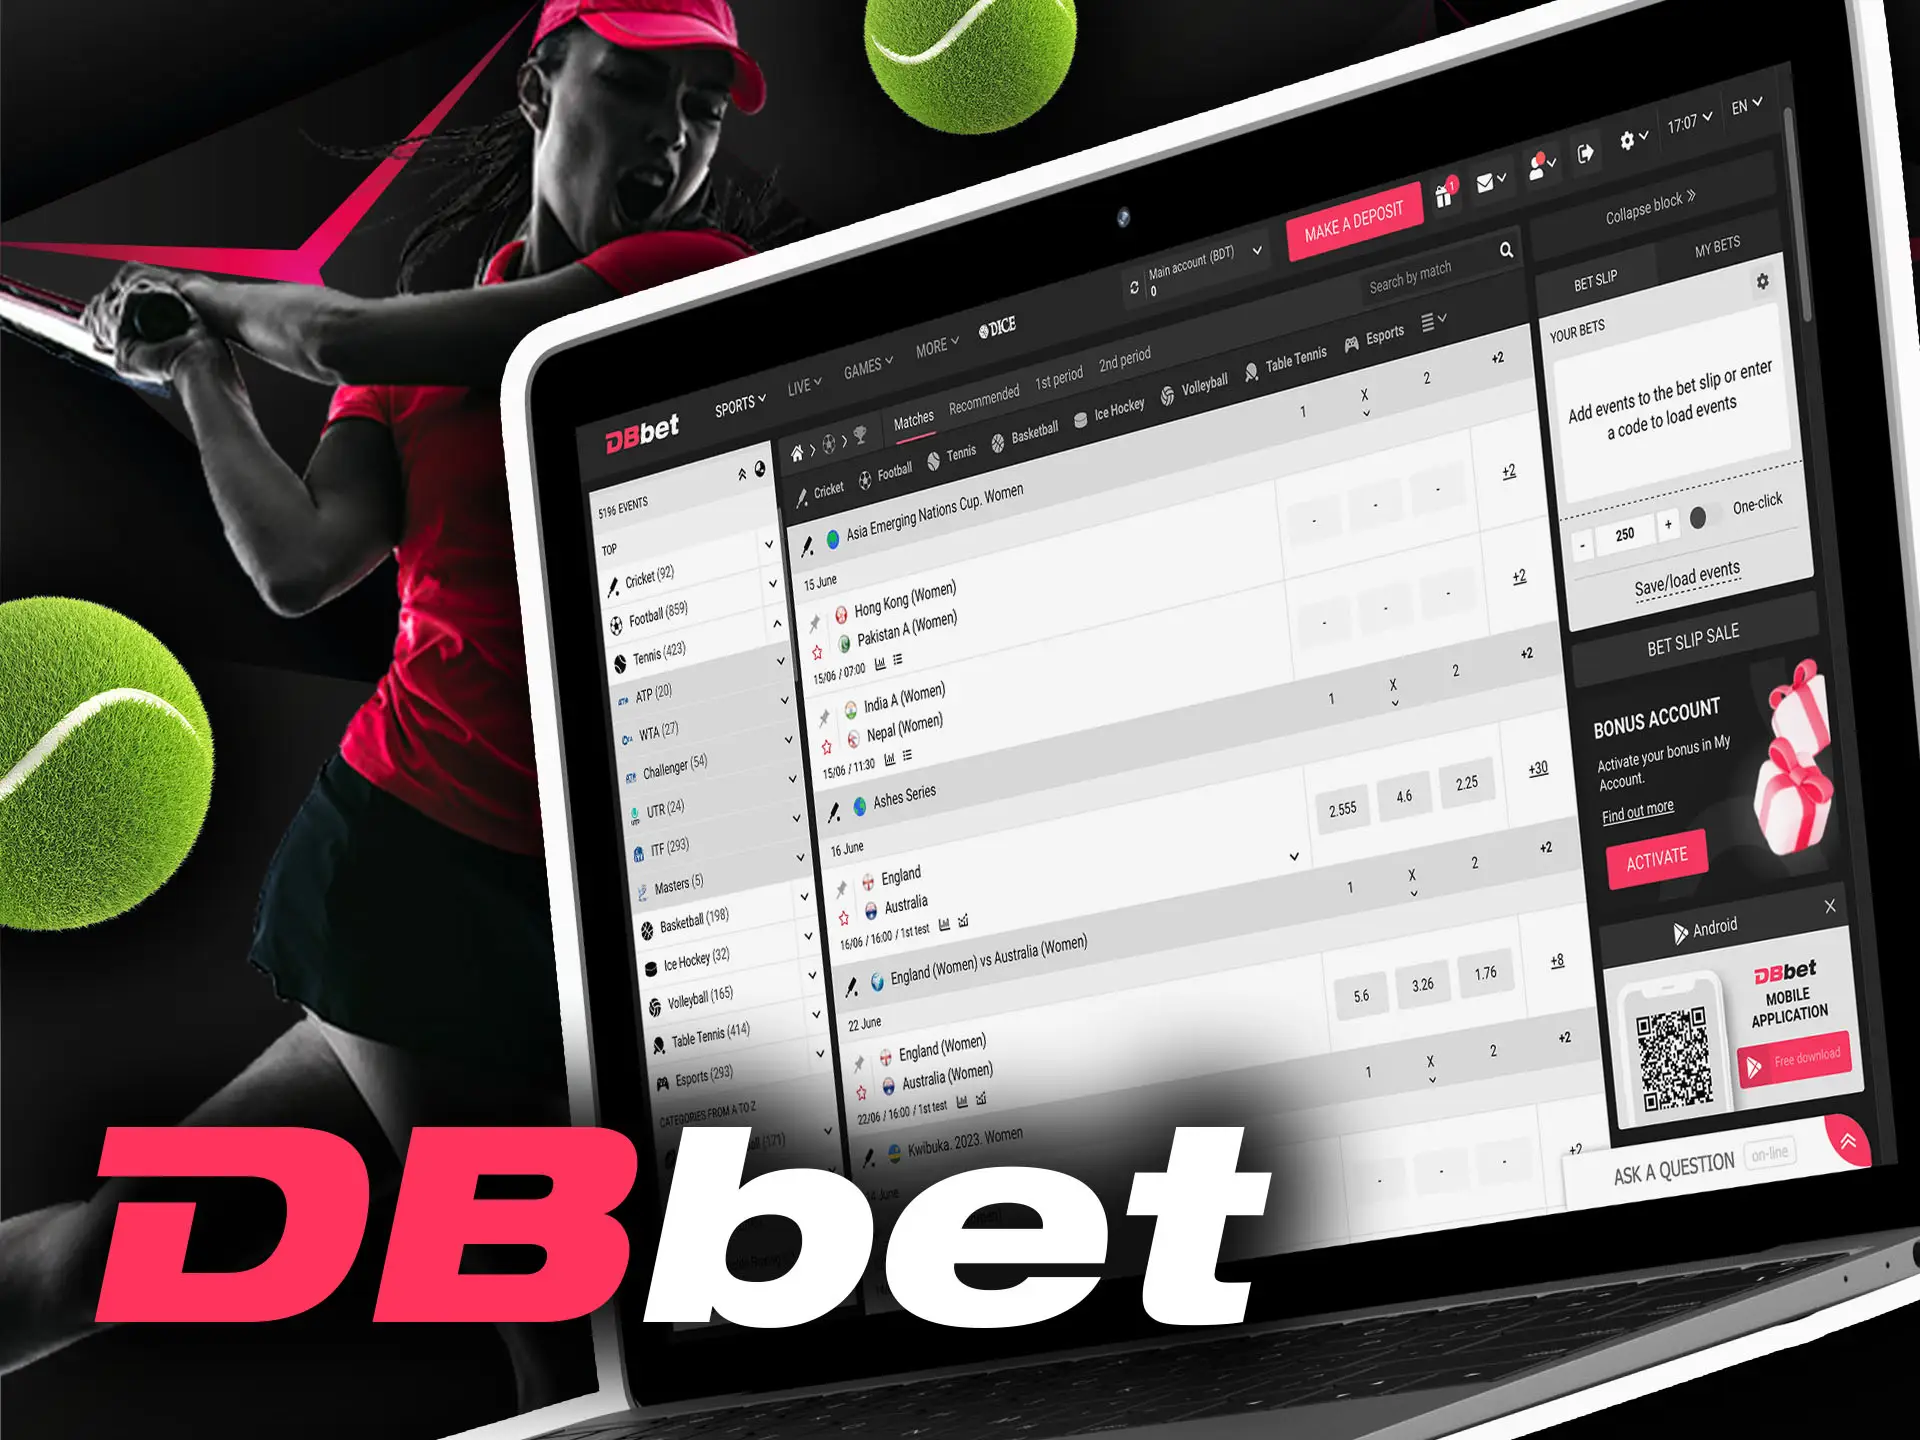 You can bet on tennis on DBbet.